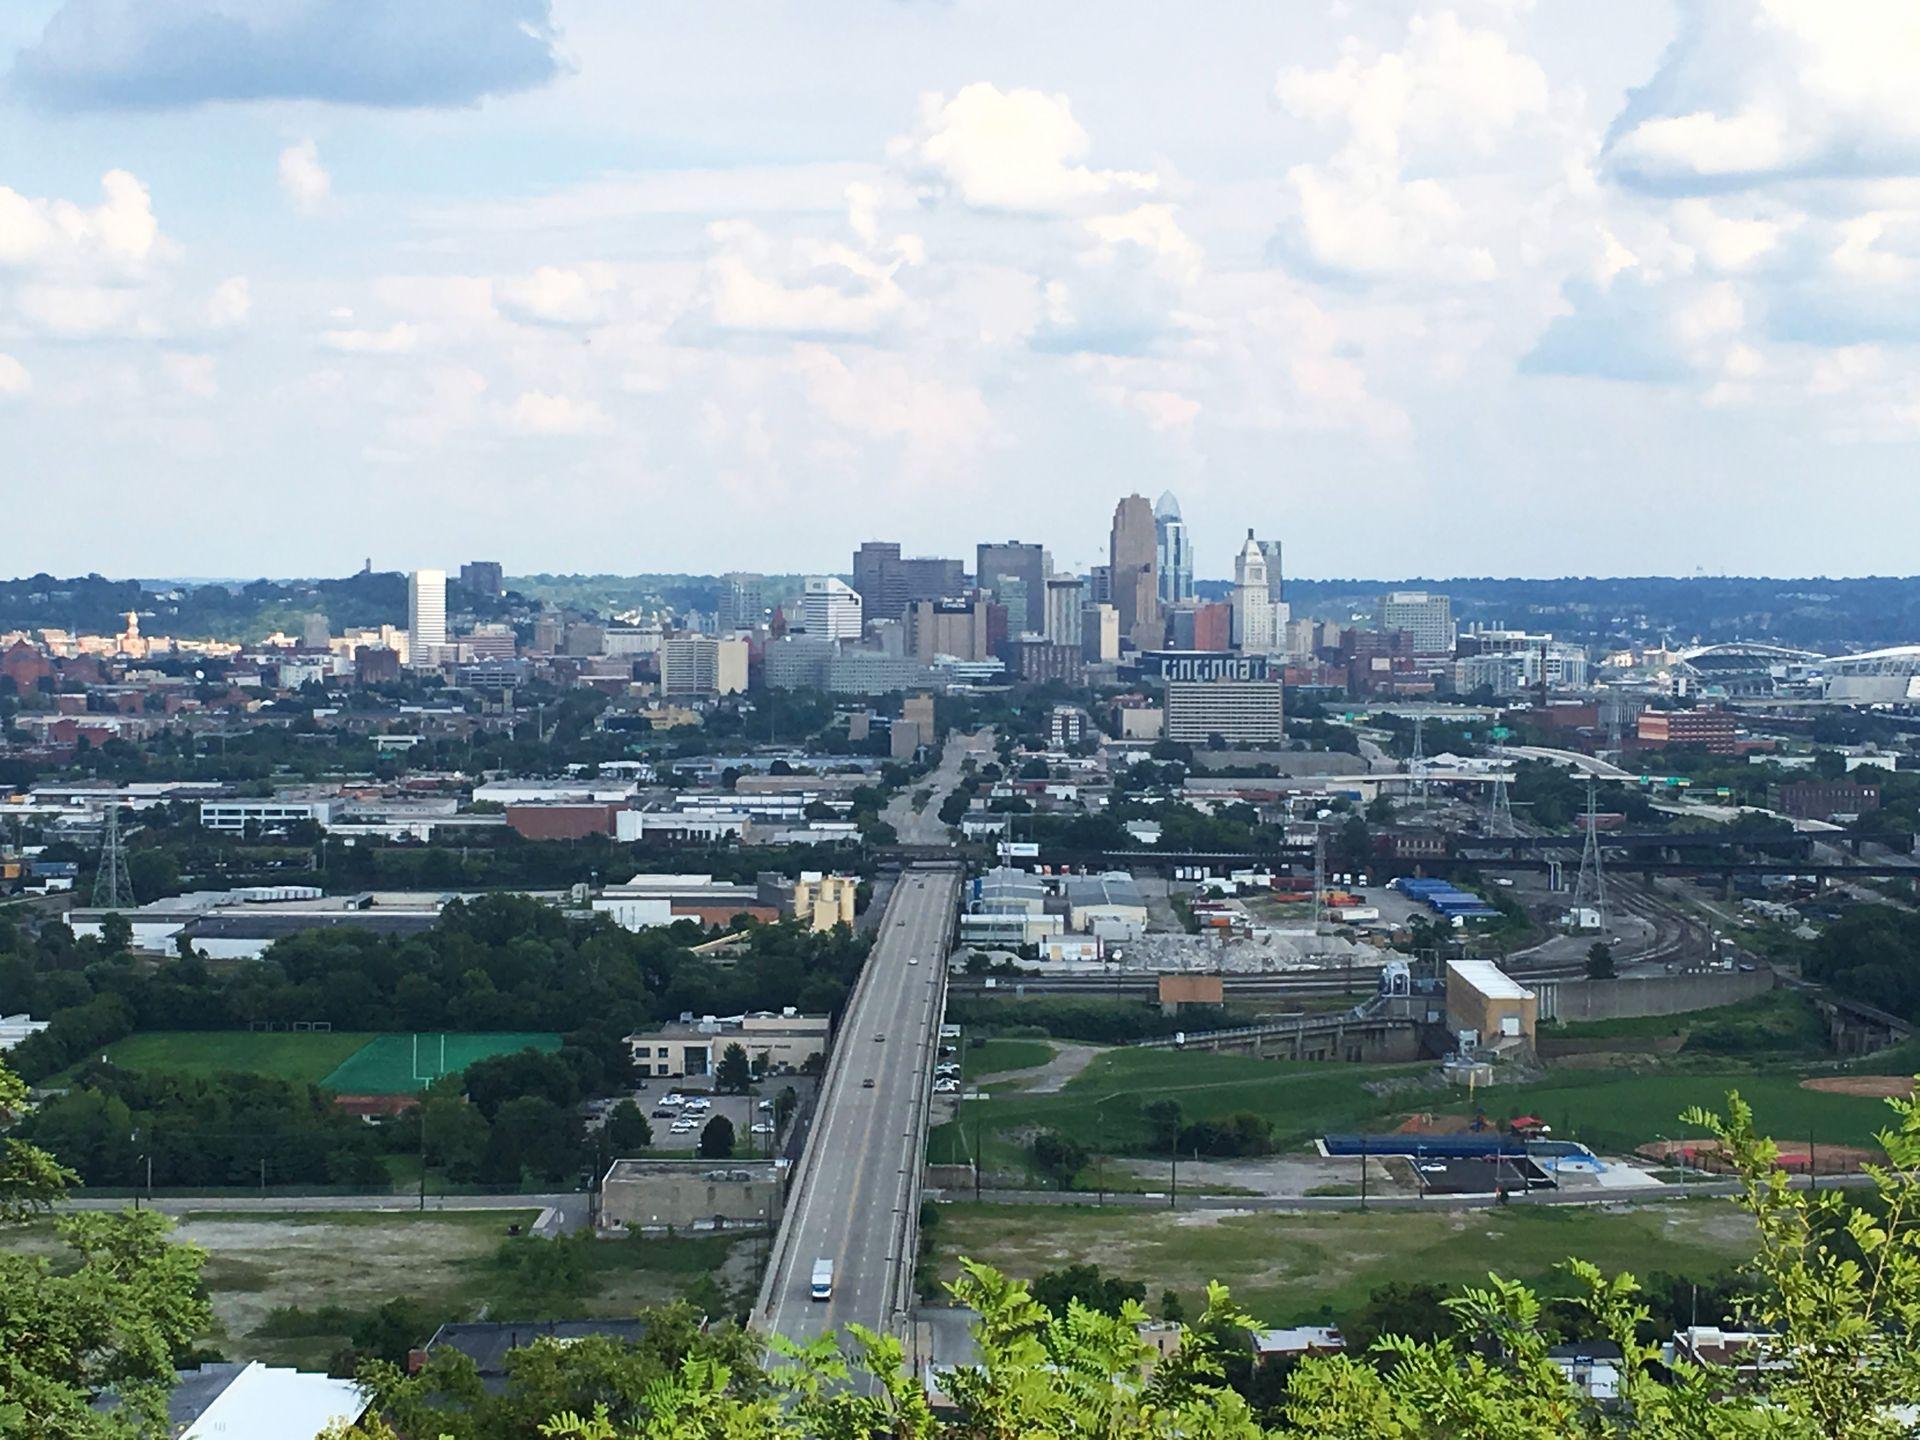 A view of the Cincinnati skyline from Price Hill. There is a highway bridge between the viewer and the city. One building downtown has the word 'Cincinnati' written on it.